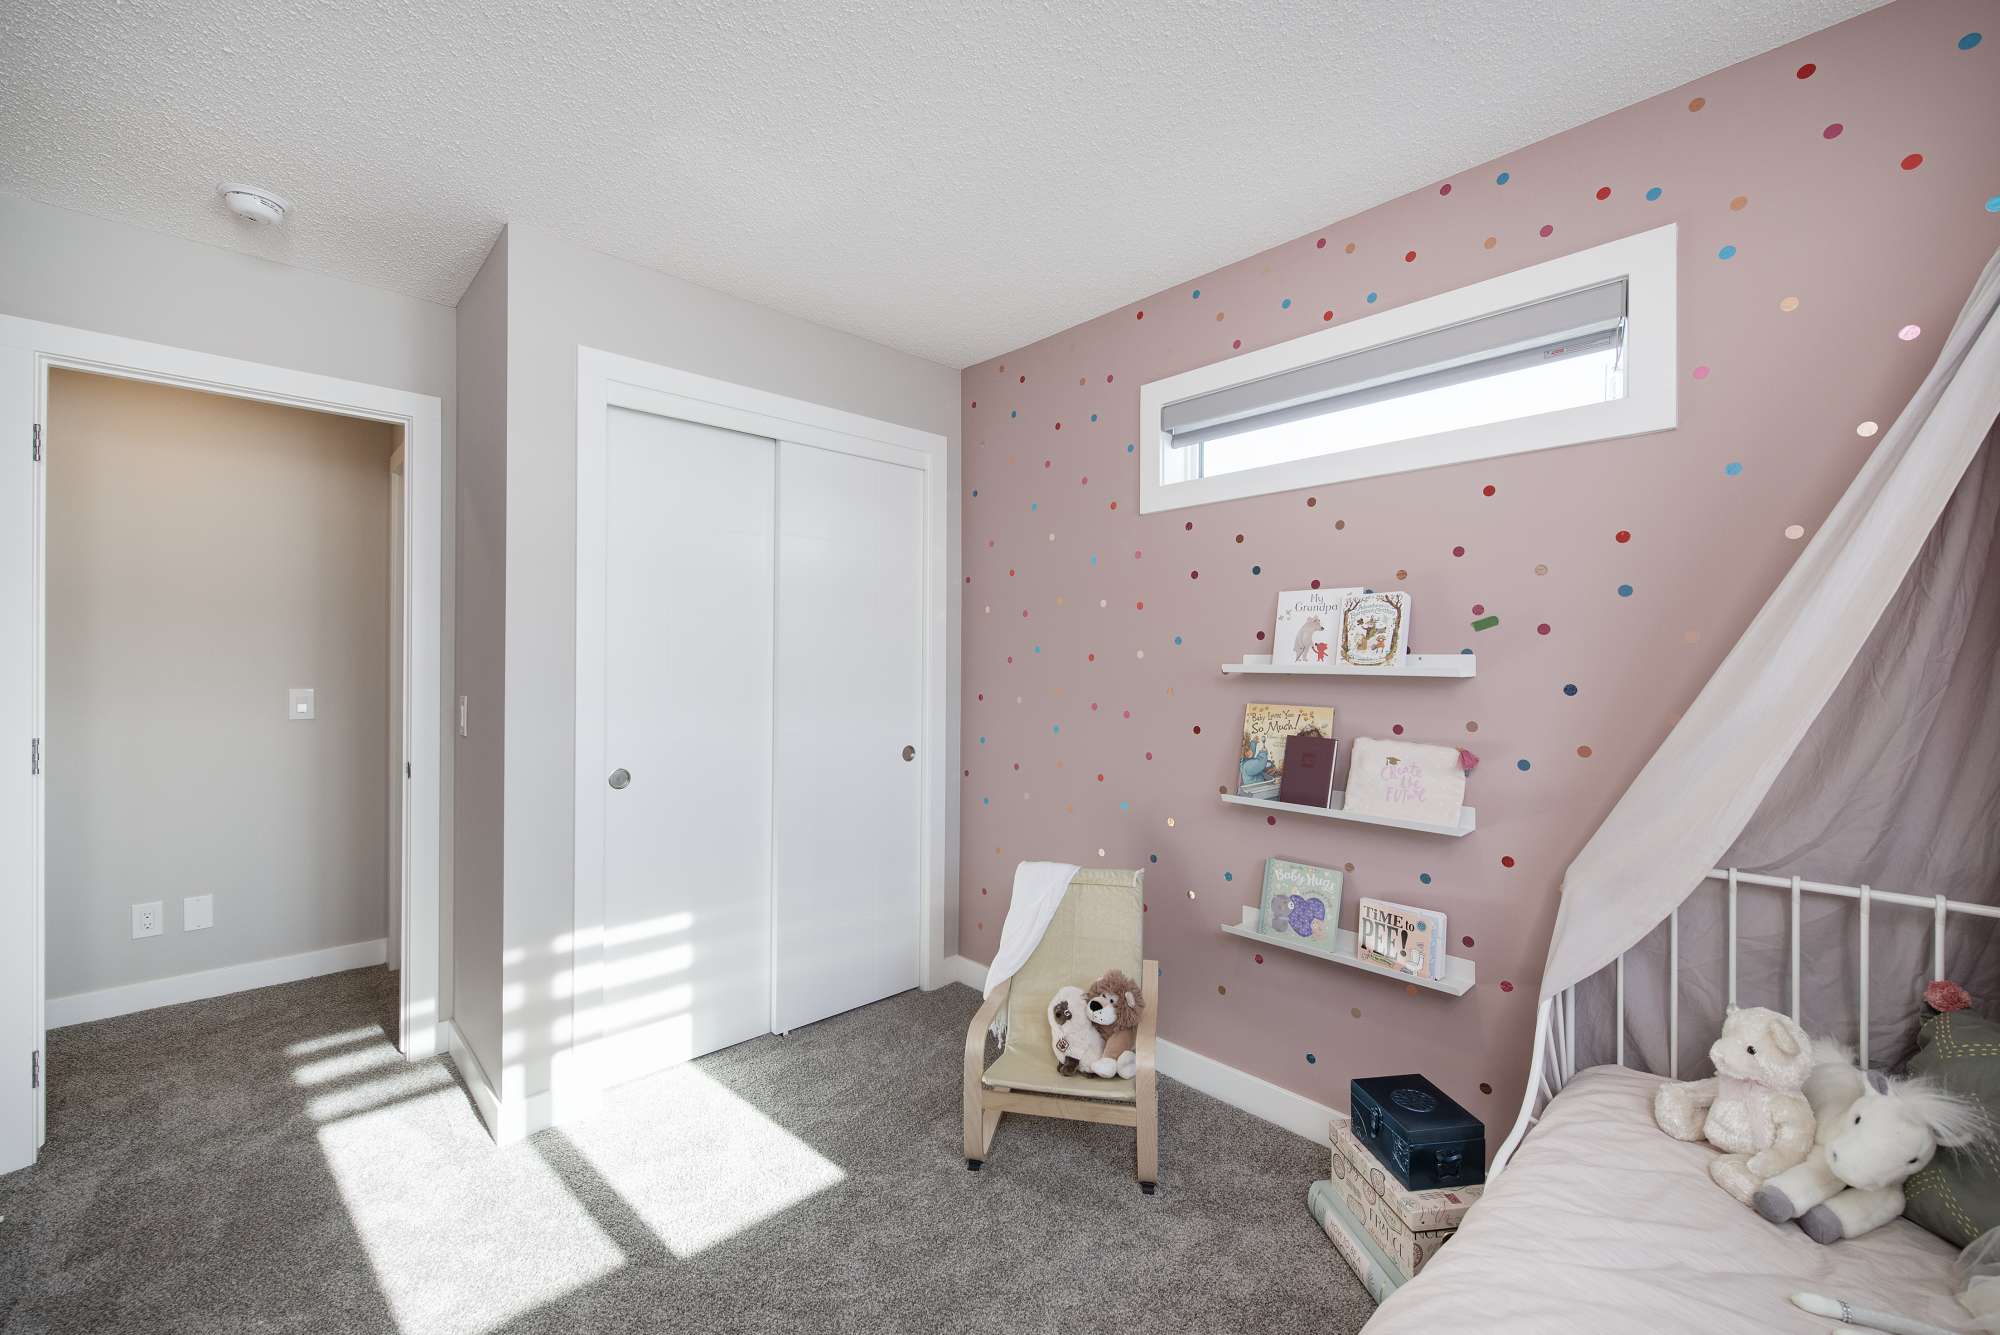 A child's bedroom with pink walls, stuffed animals, and a small chair.